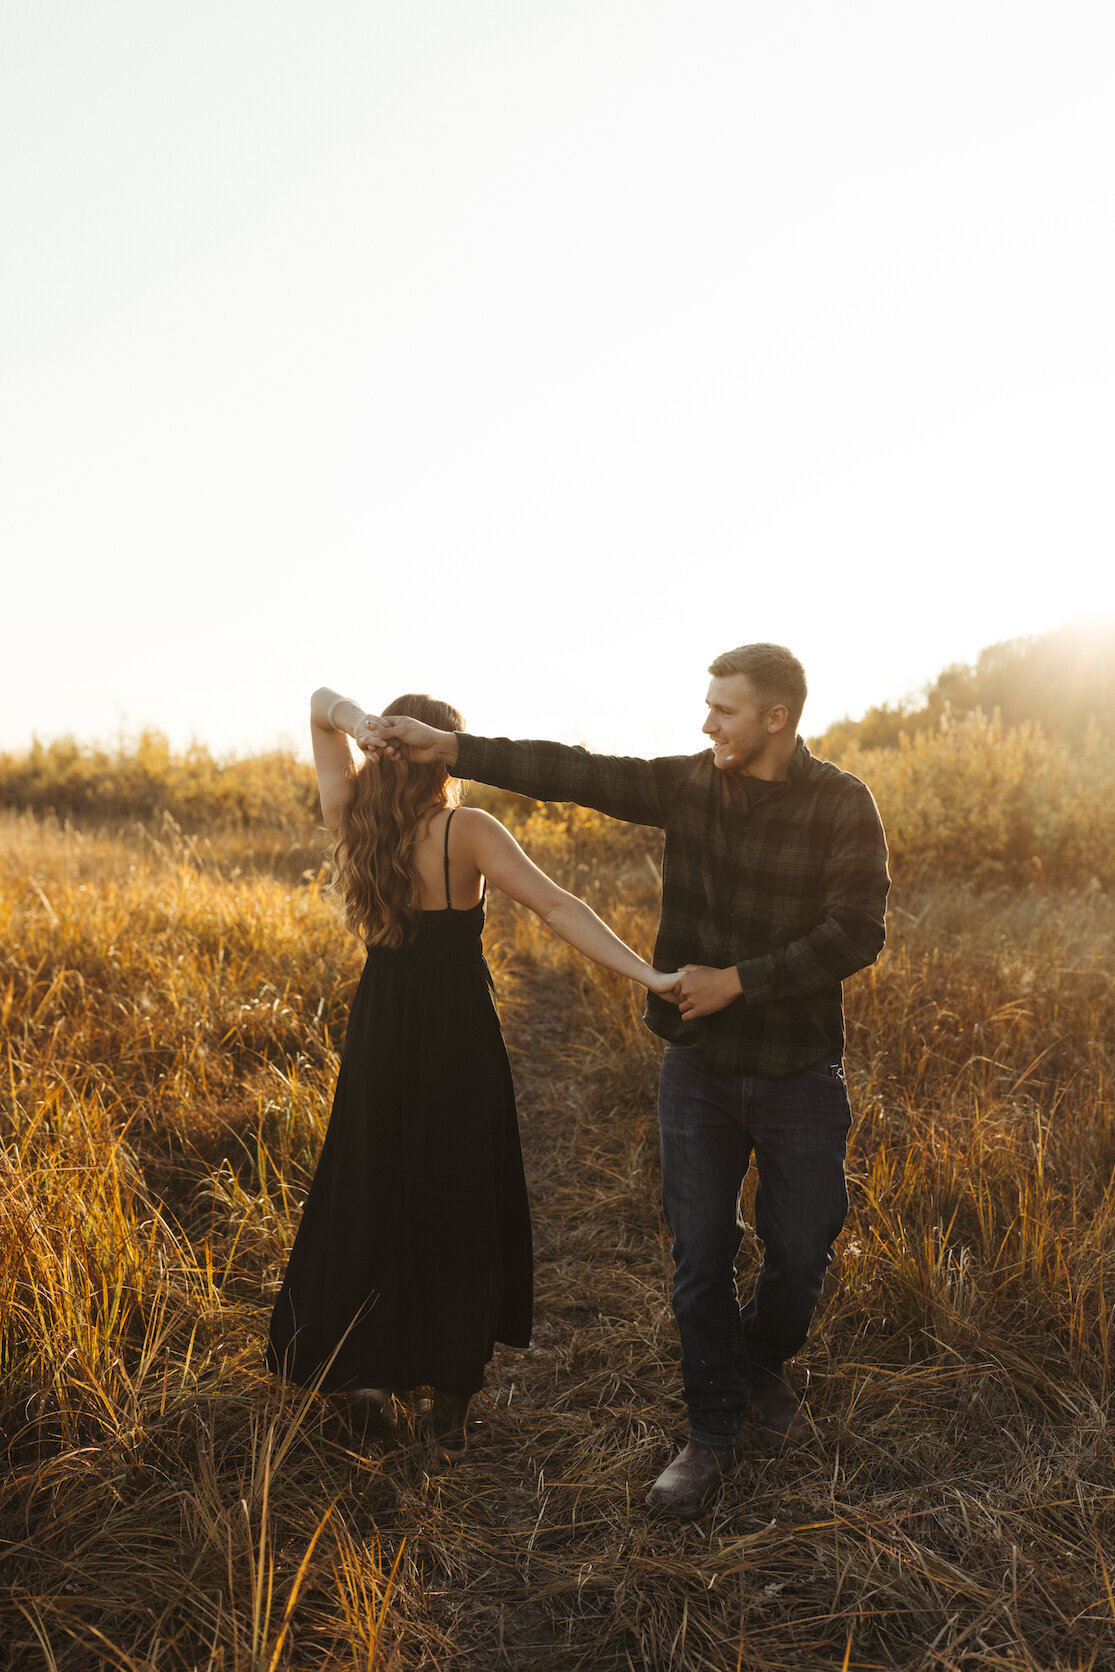 Man and woman dancing in a field together